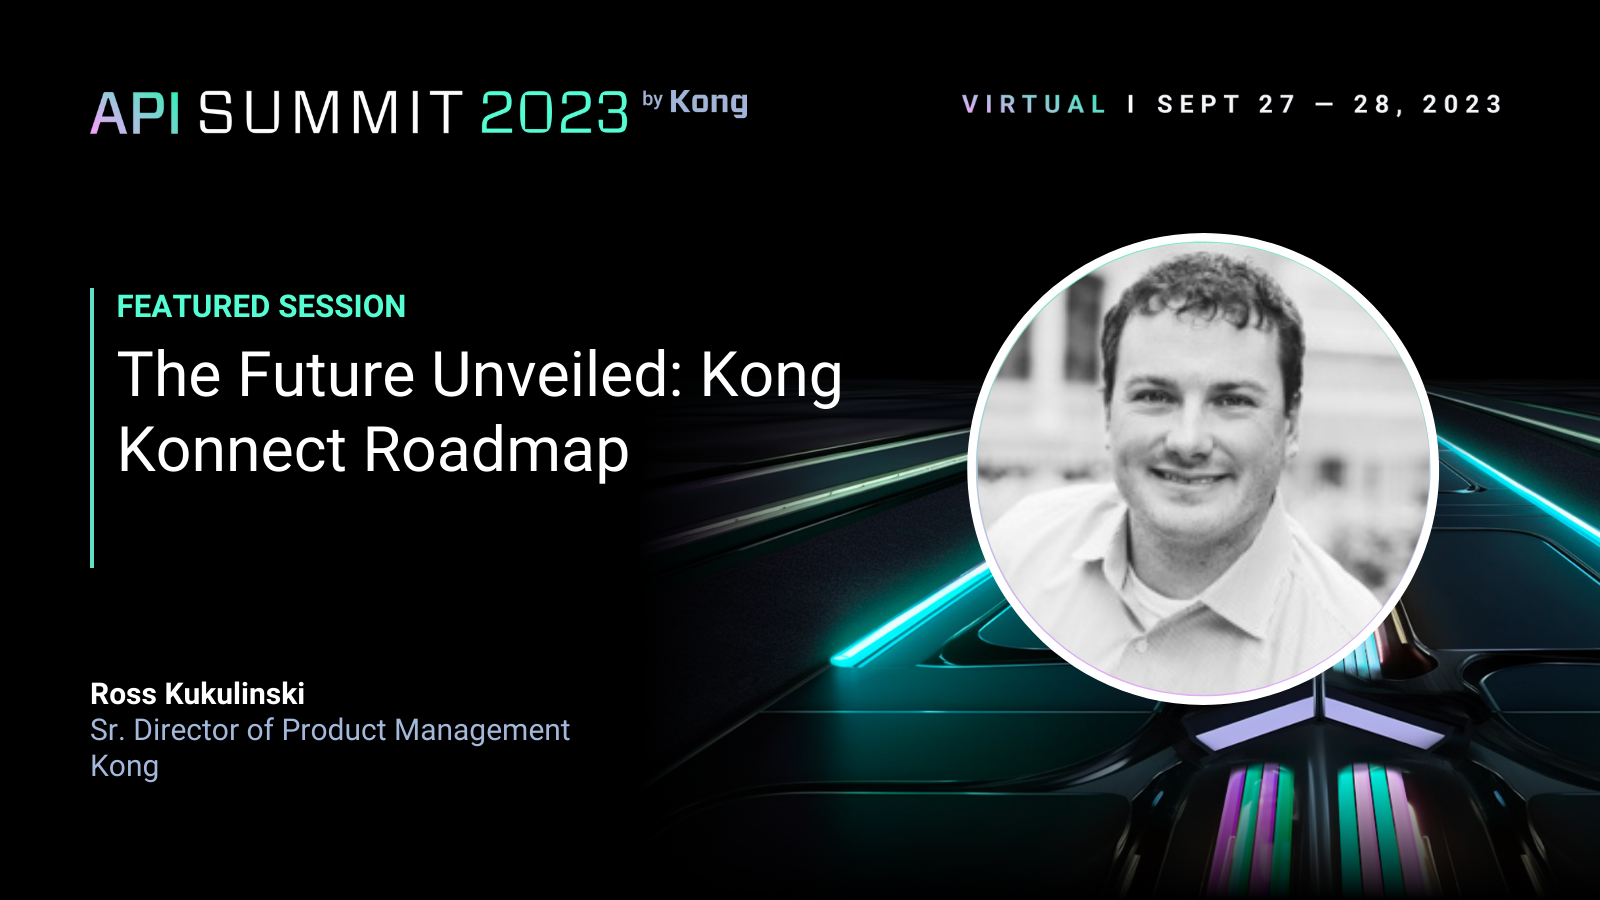 The Future Unveiled: Kong Konnect Roadmap